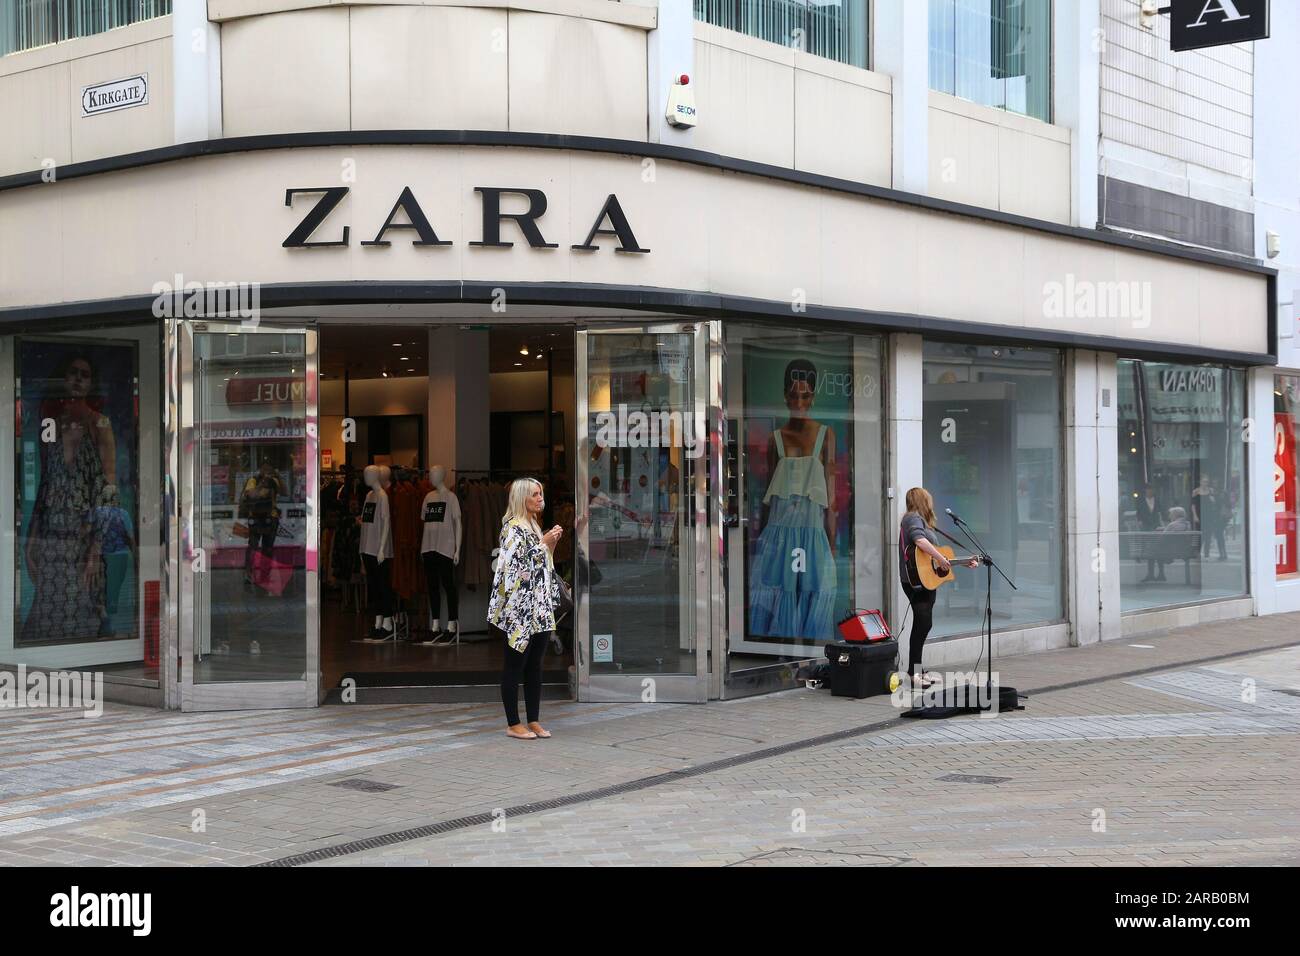 LEEDS, UK - JULY 12, 2016: Shopper exits Zara fashion store in Leeds, UK.  Zara was founded in 1975 and is present in 73 countries (2012 Stock Photo -  Alamy